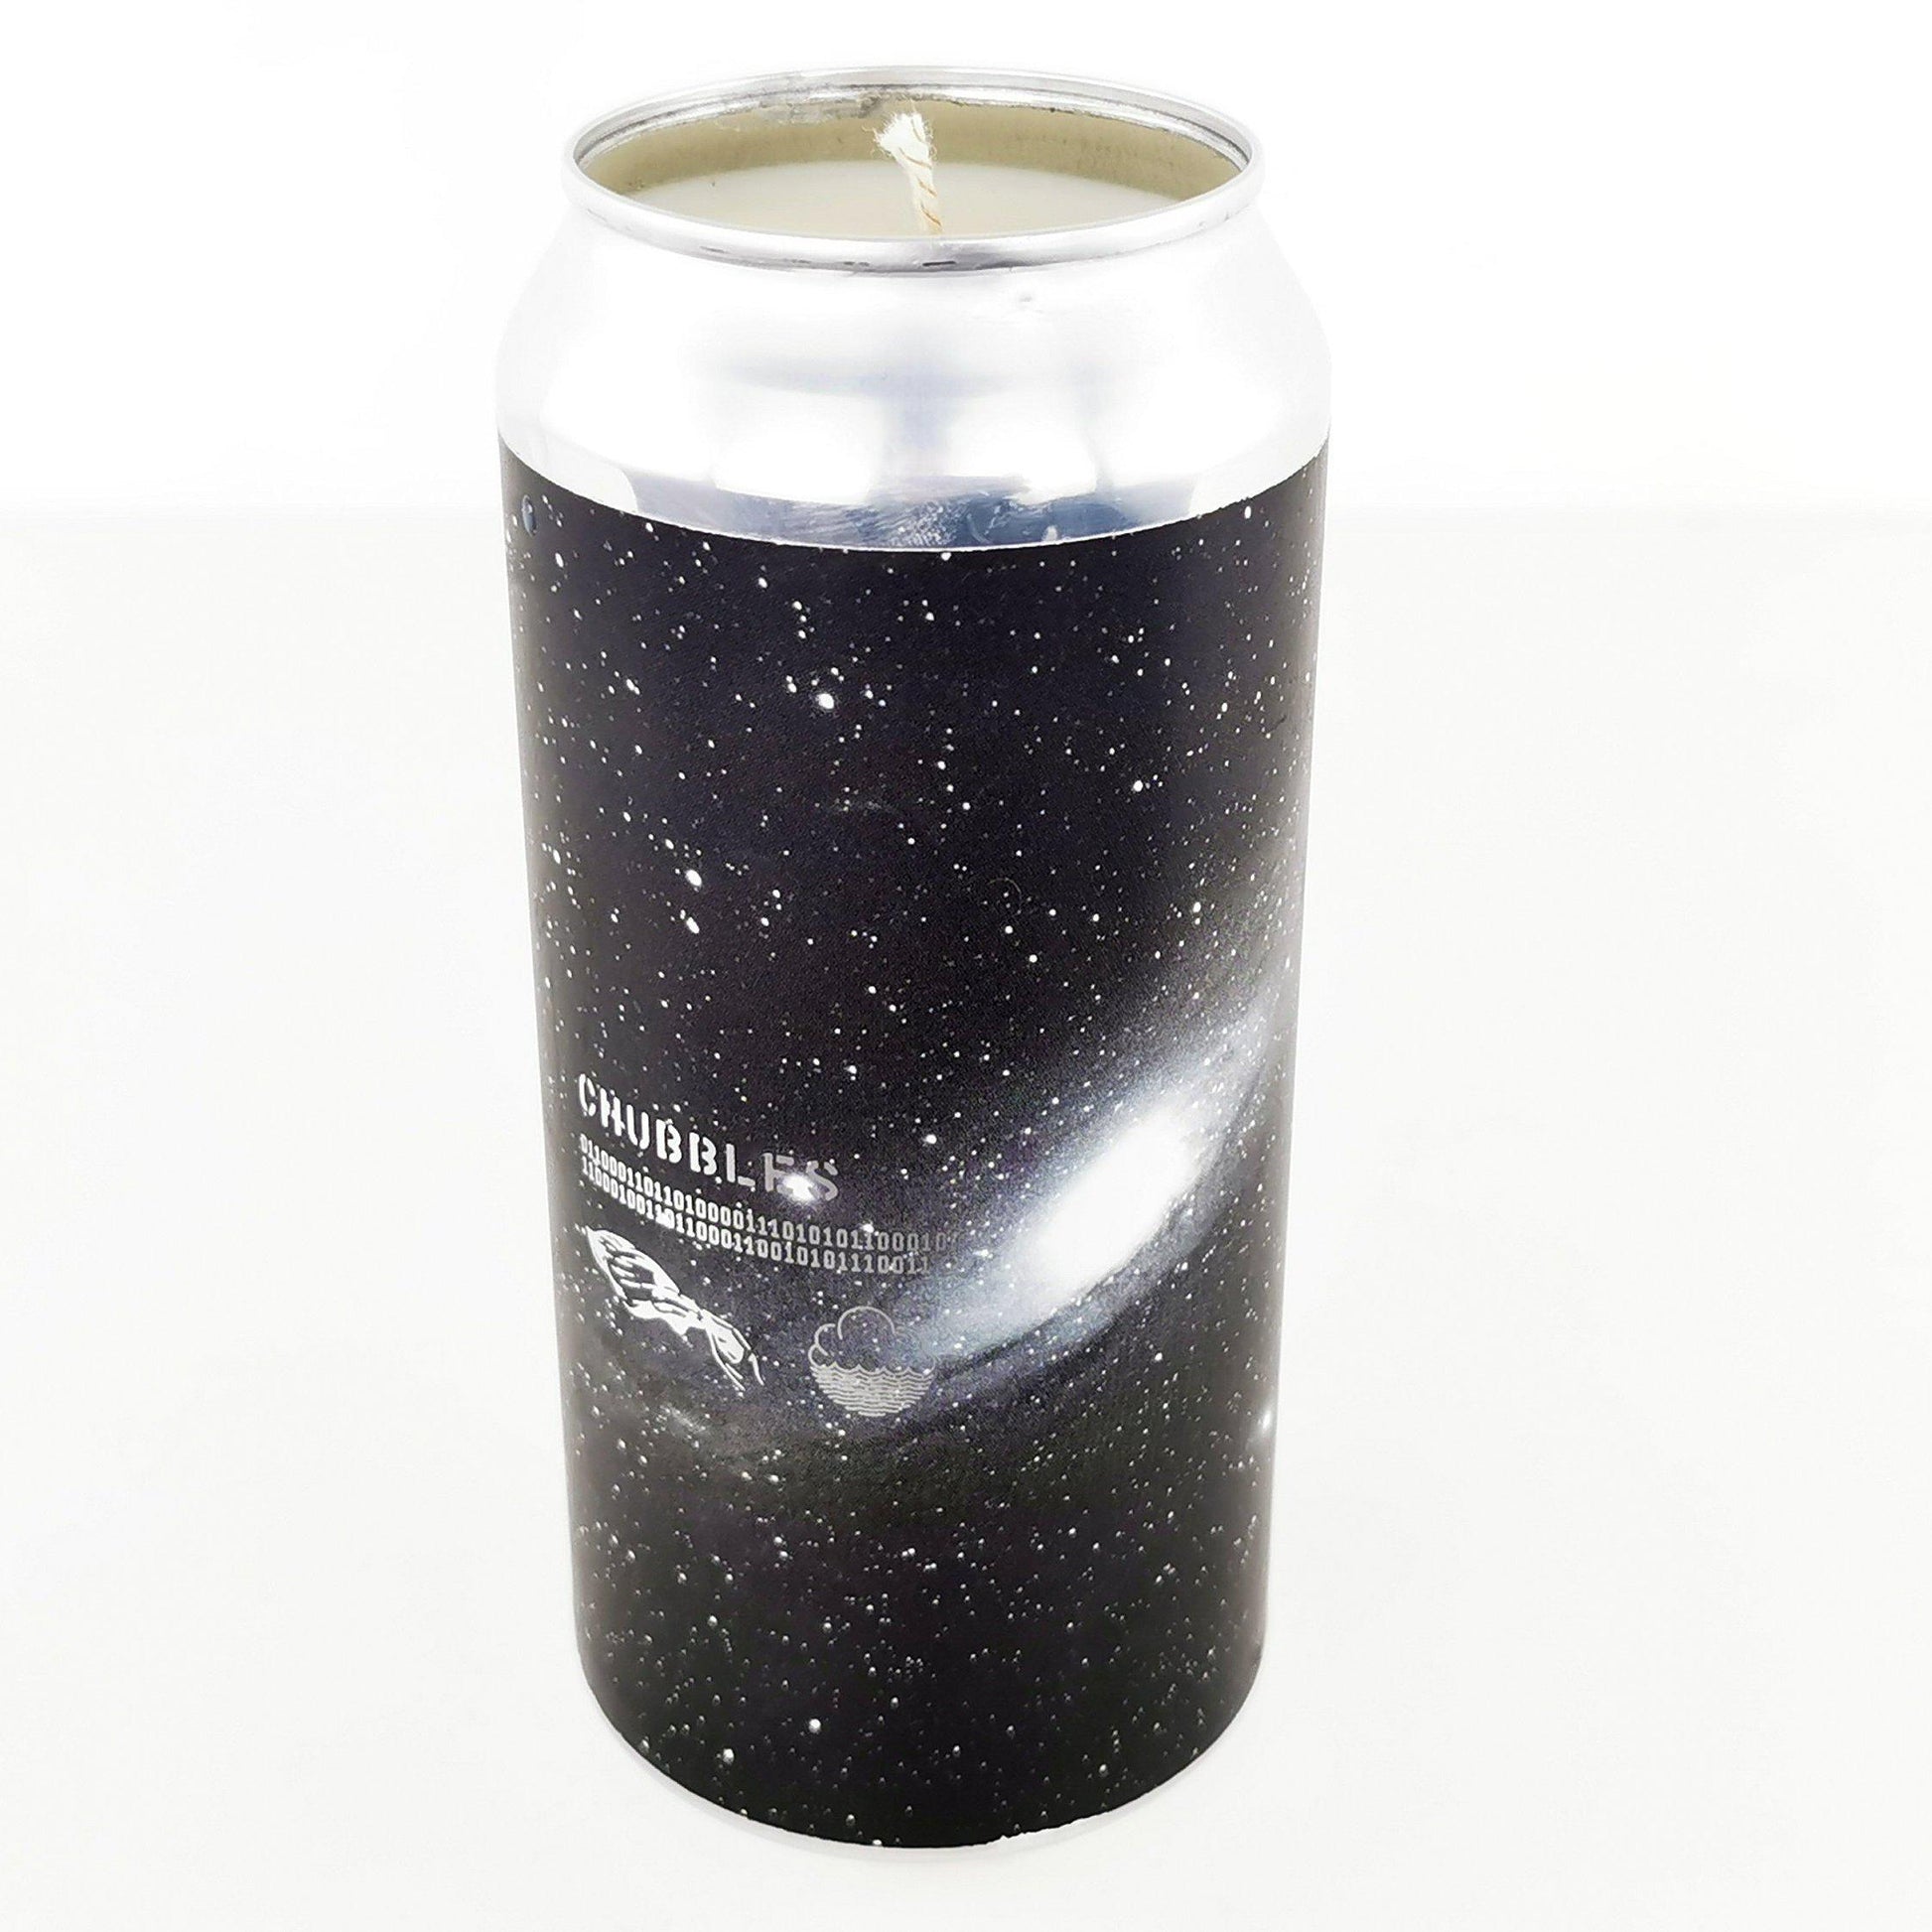 Cloudwater Chubbles Craft Beer Can Candle Beer Can Candles Adhock Homeware